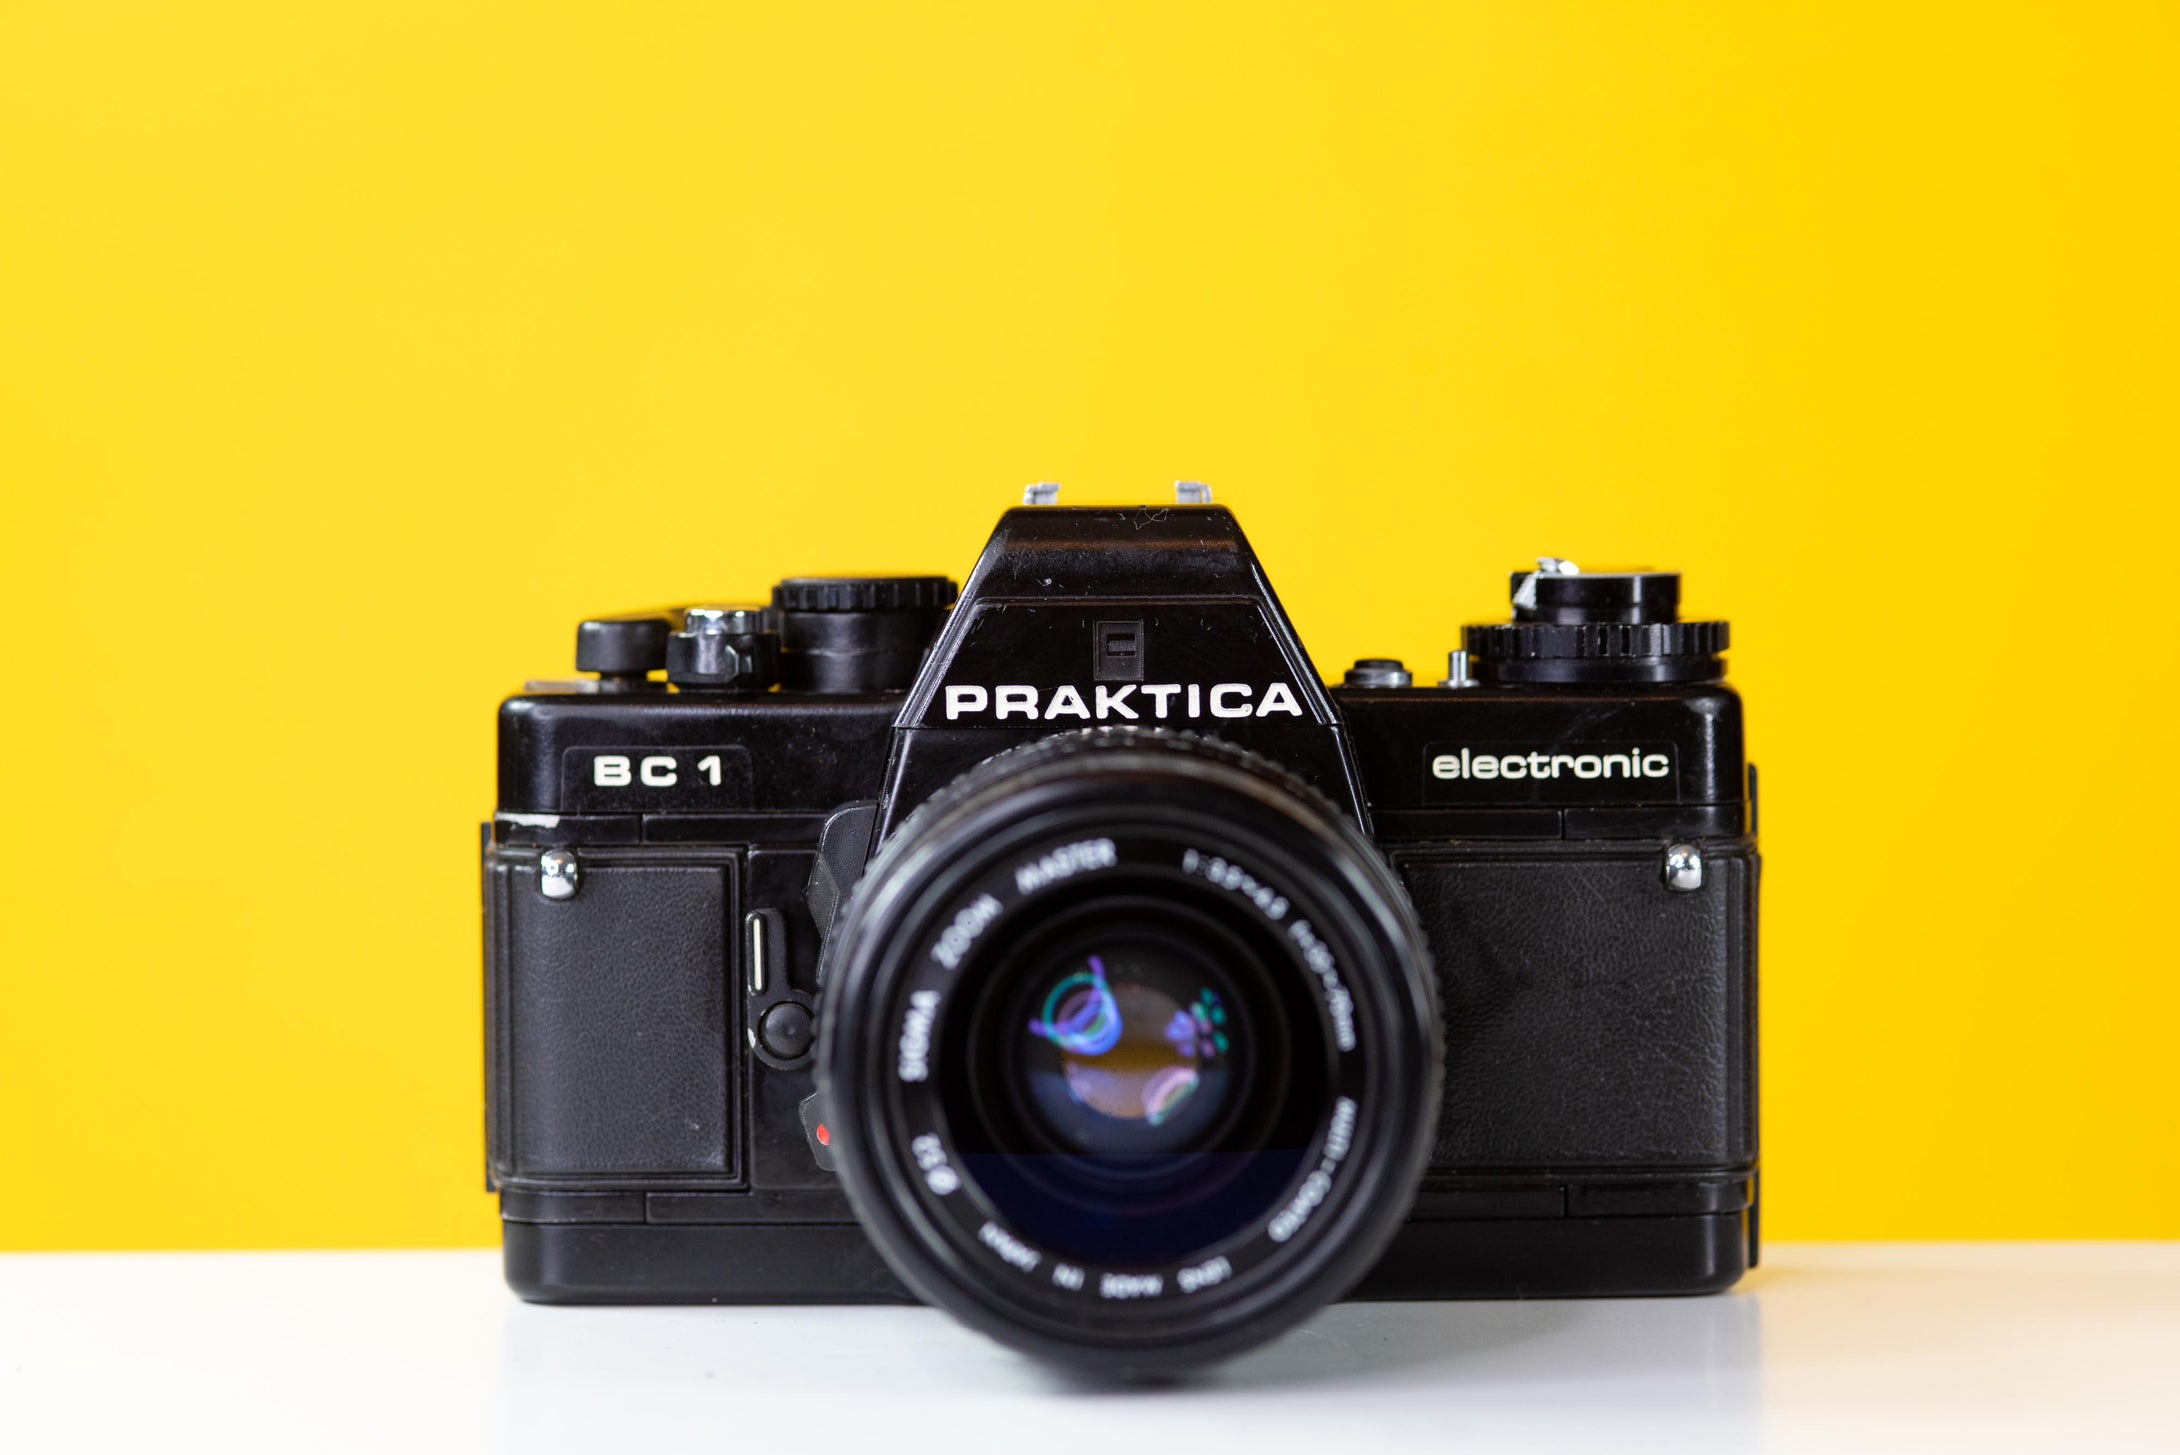 Practica BC1 Electronic Vintage 35mm Film Camera with Sigma Zoom 35-70mm f/3.5 Prime Lens